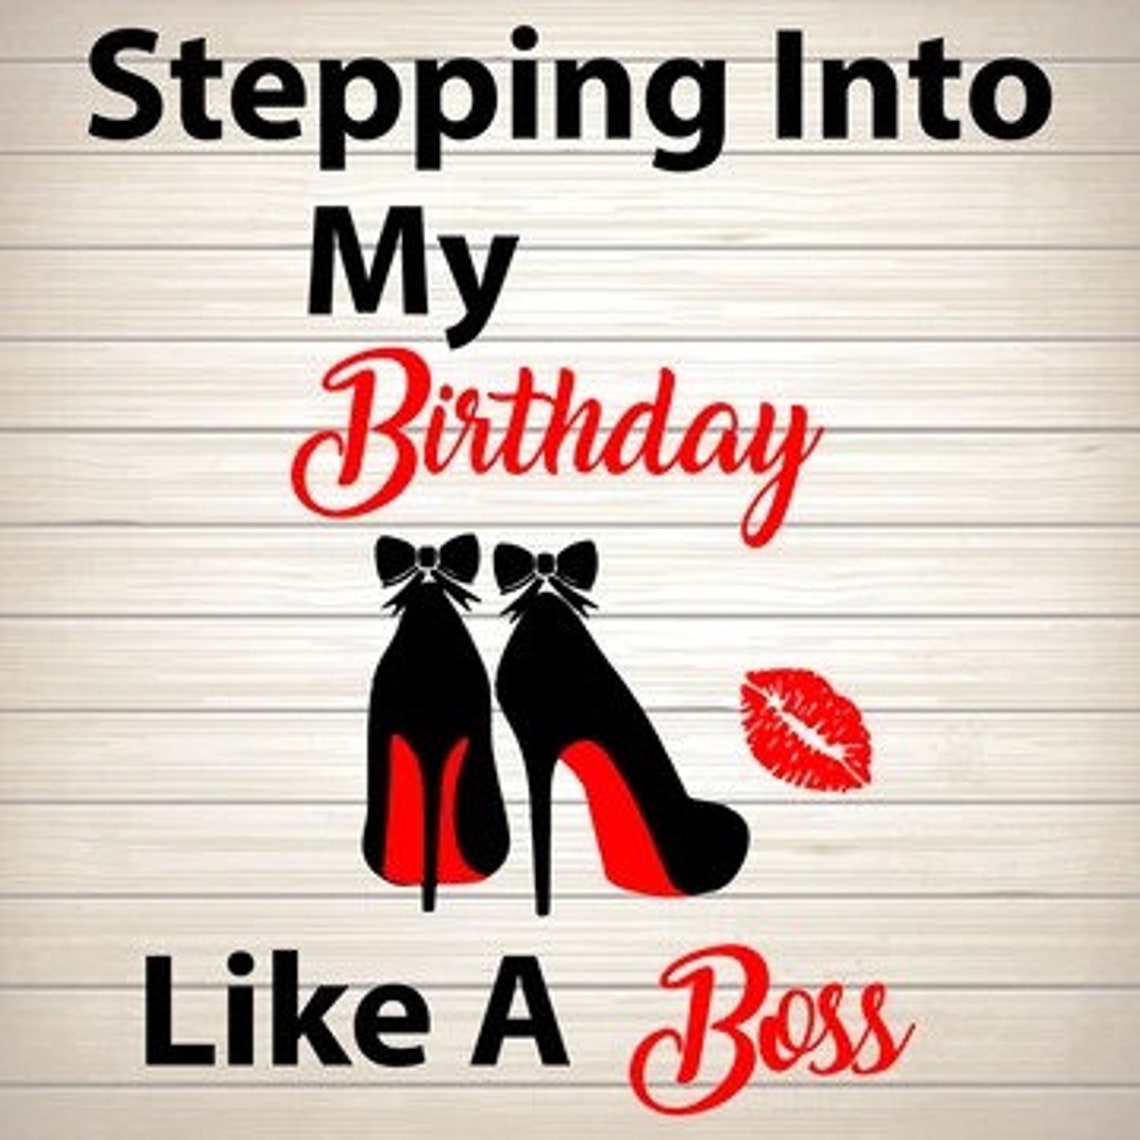 Stepping into my birthday svg png dxf eps download files | Etsy